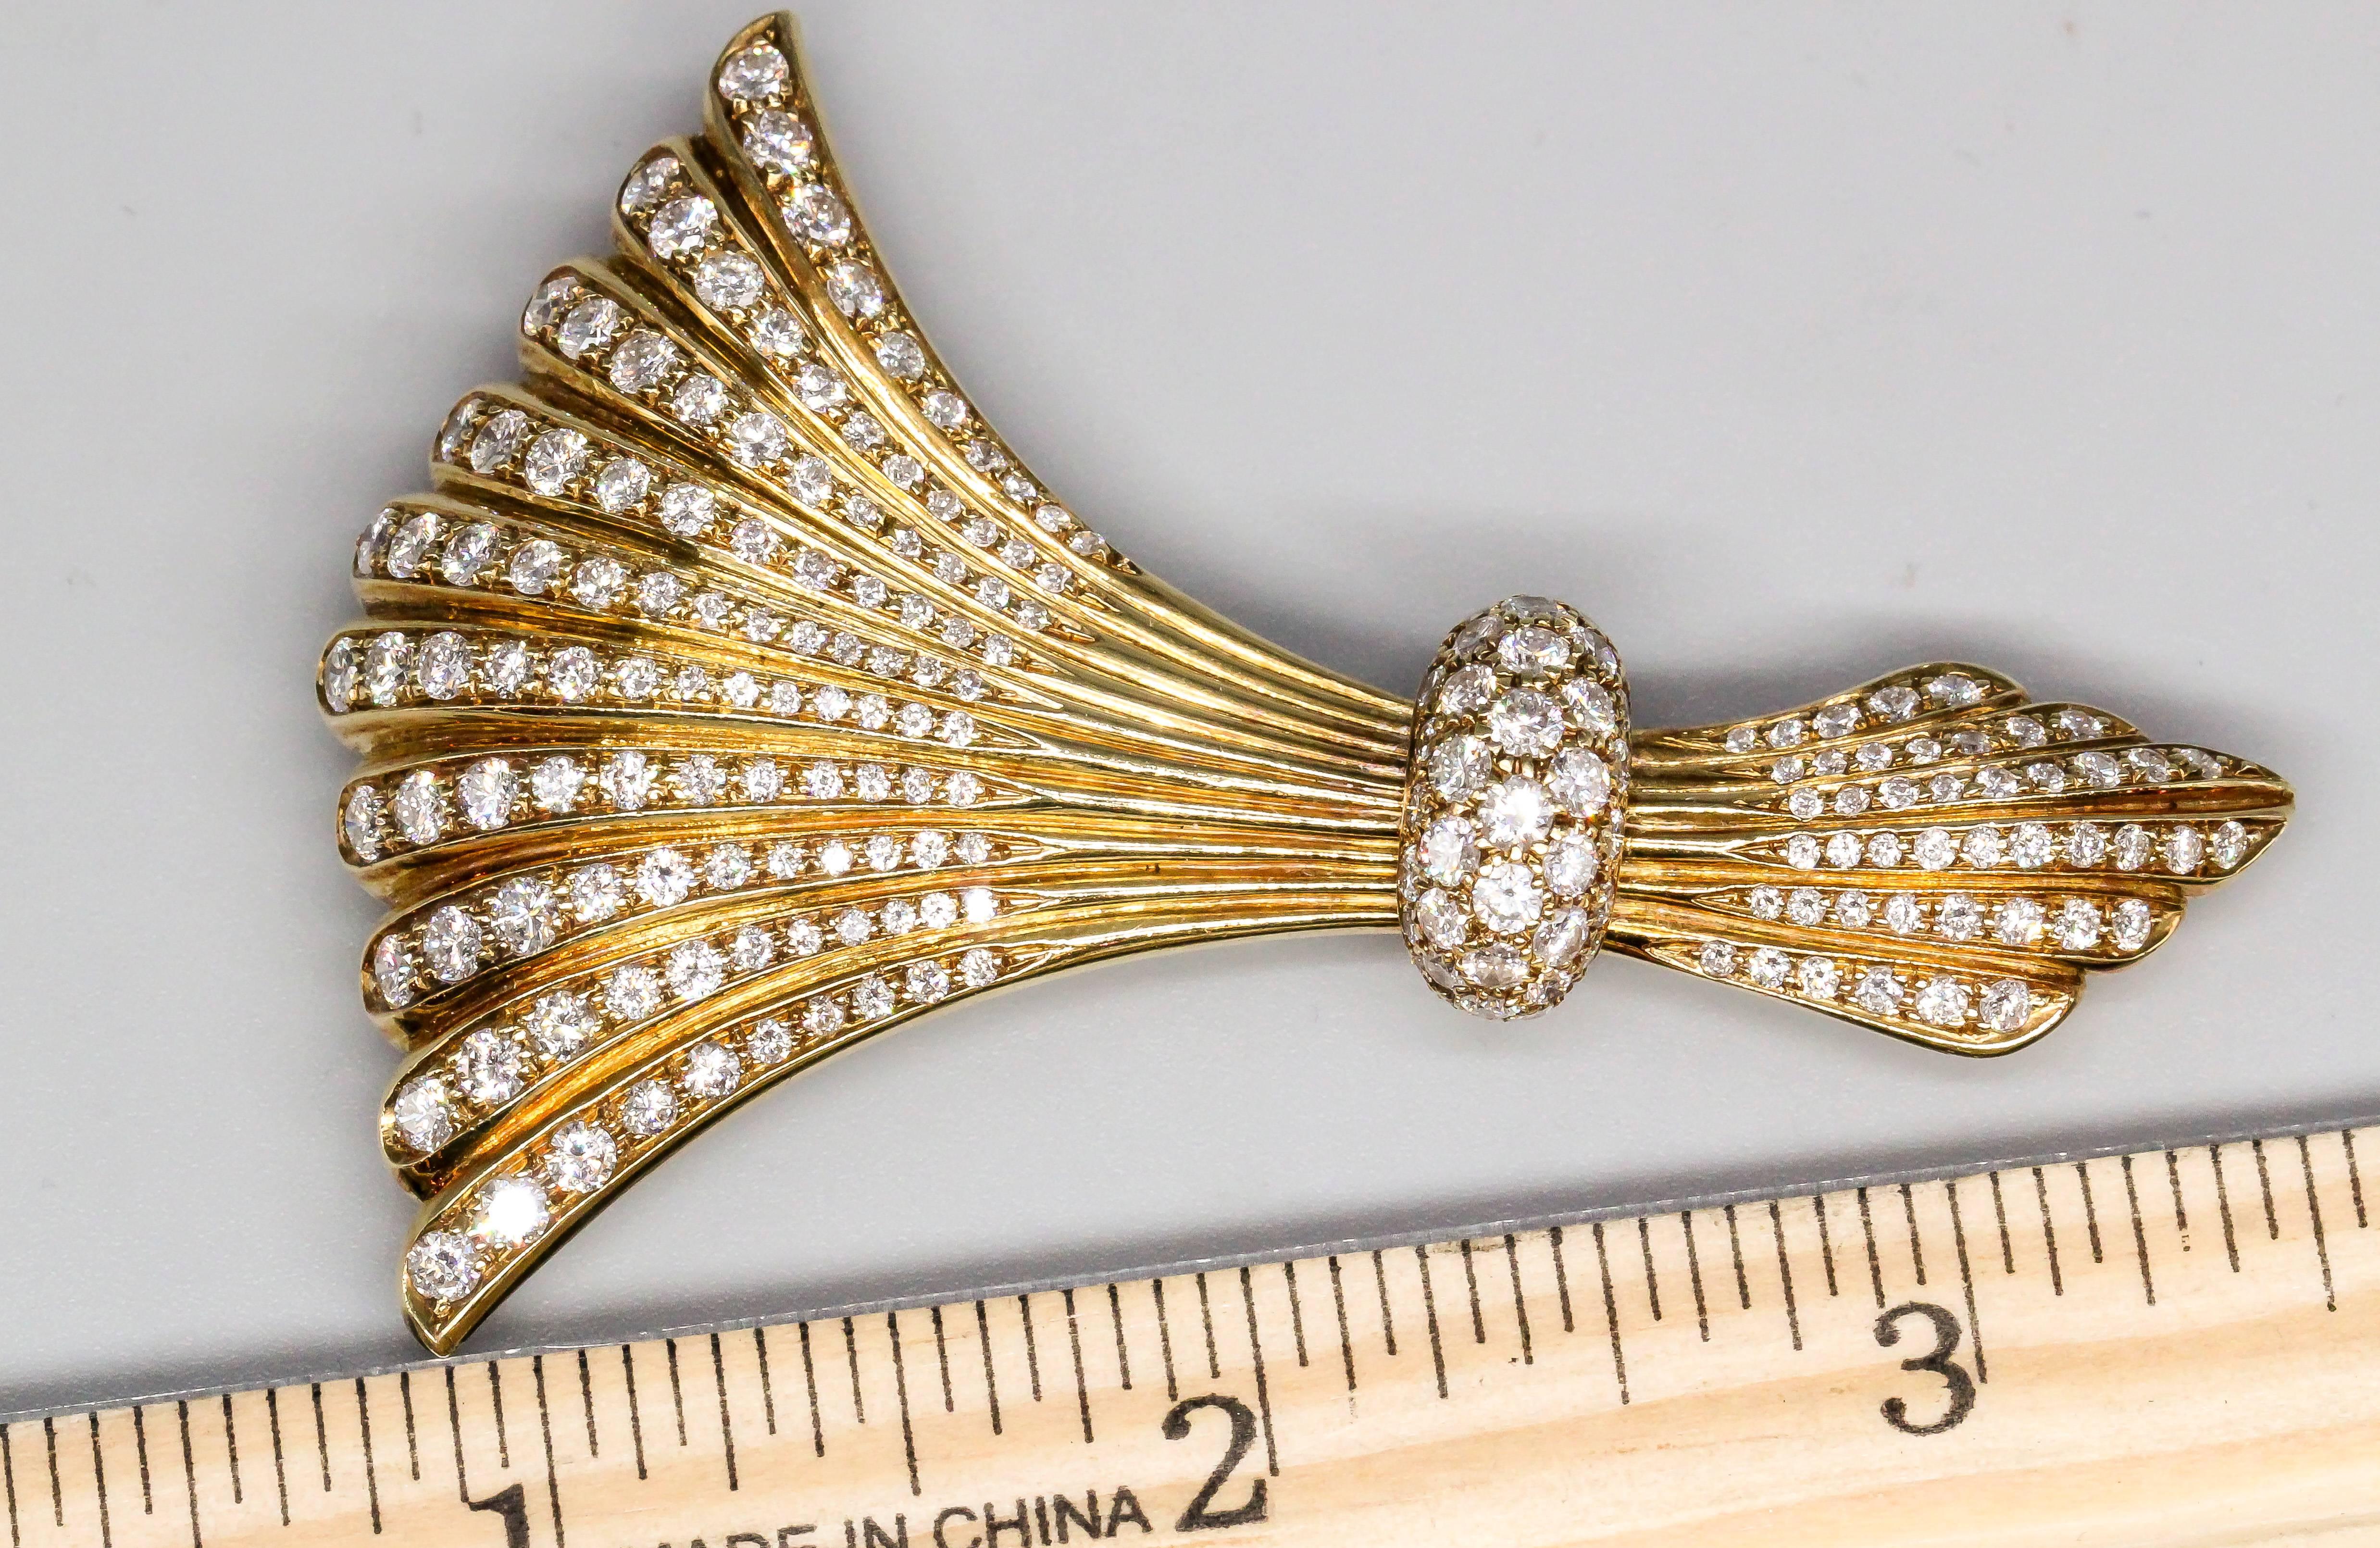 Elegant Mid-Century diamond and 18K yellow gold brooch and accessory piece of European origin. It features high grade round brilliant cut diamonds, over an impeccably made 18K yellow gold mounting. Very versatile, as it can be worn as a brooch by